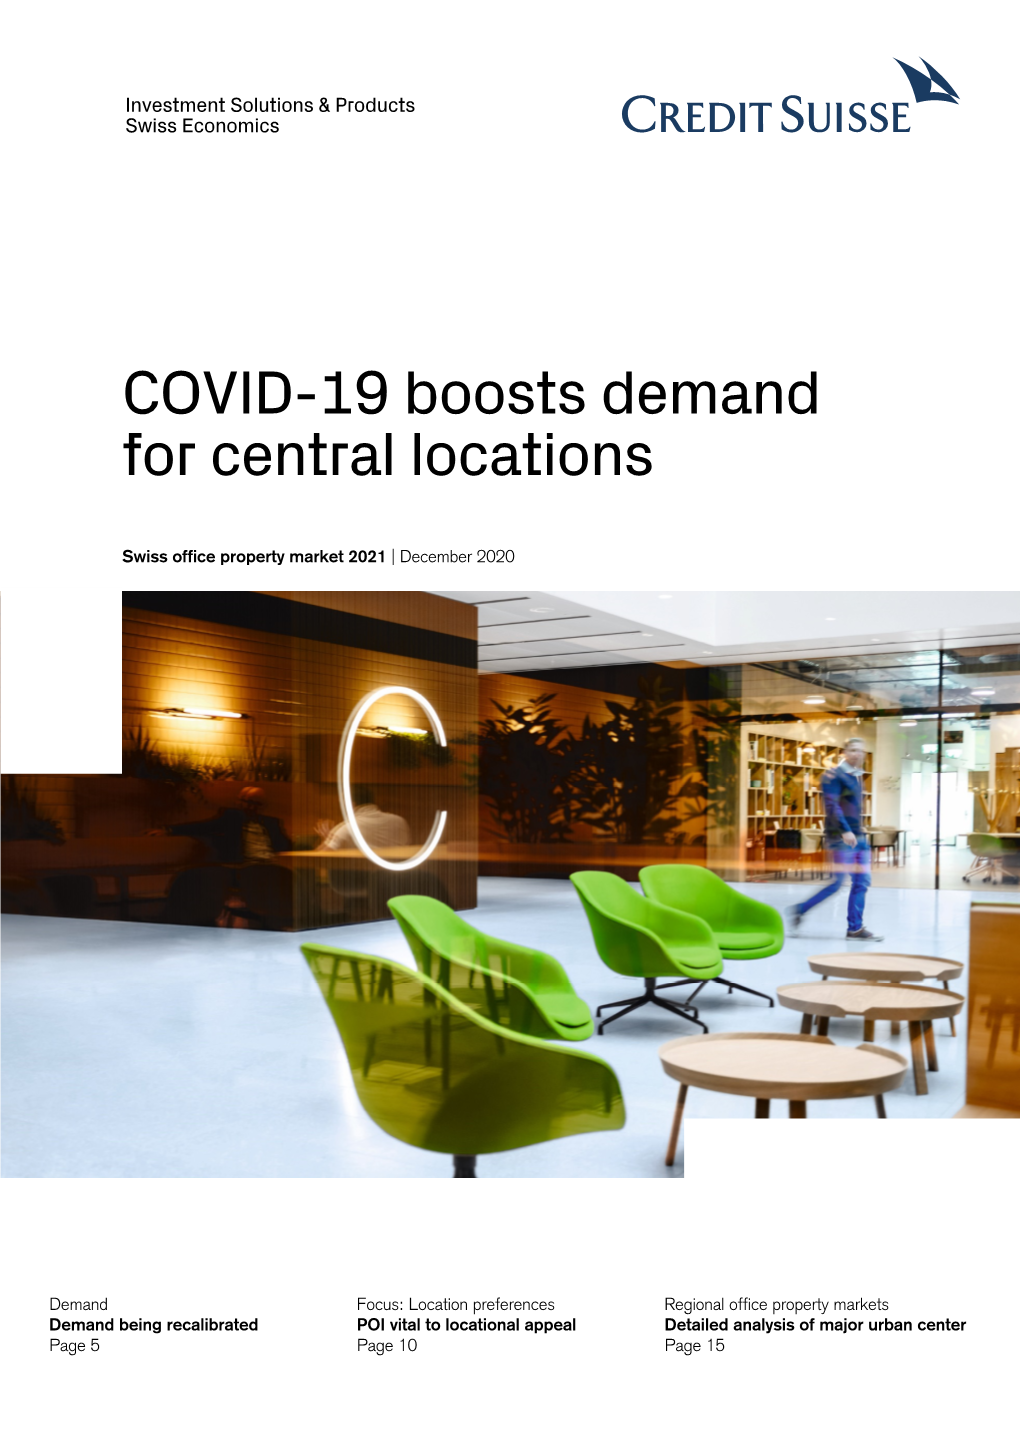 COVID-19 Boosts Demand for Central Locations